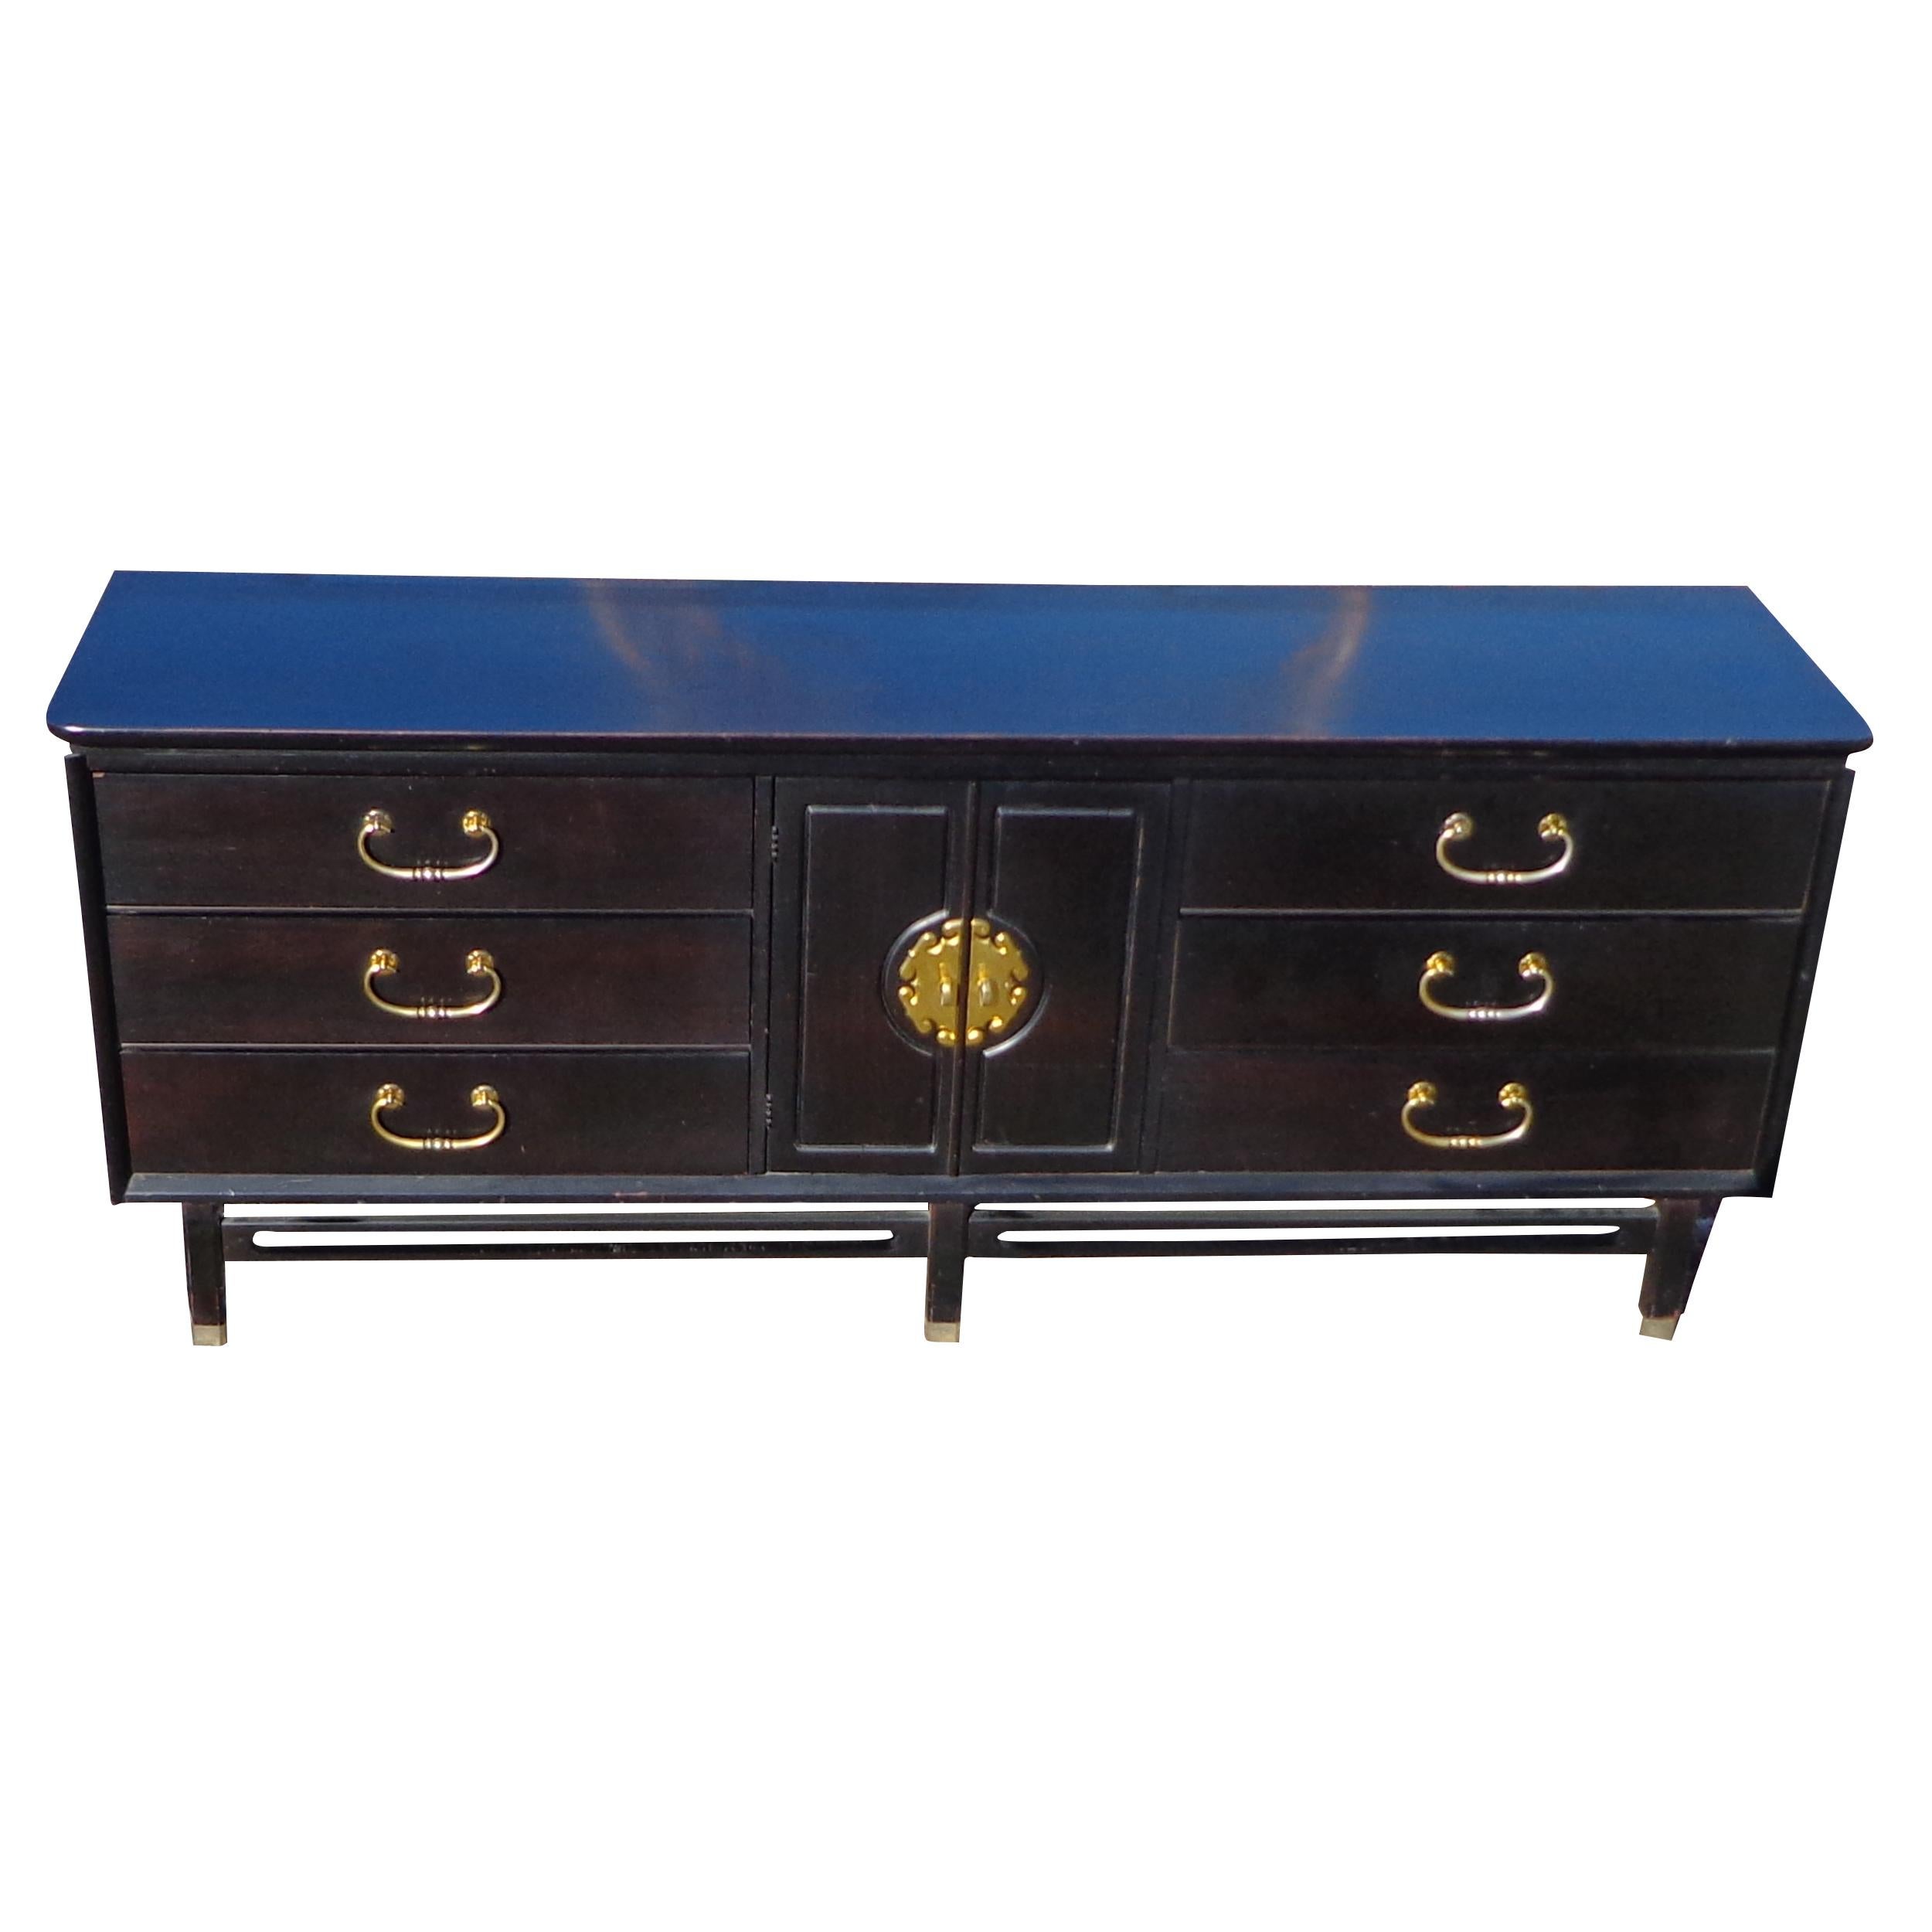 74? Bassett Hollywood Regency style dresser

Hollywood Regency dresser or credenza in an ebony lacquer finish. Features six large storage drawers with brass finished pulls and a two-door storage area with a brass medallion.